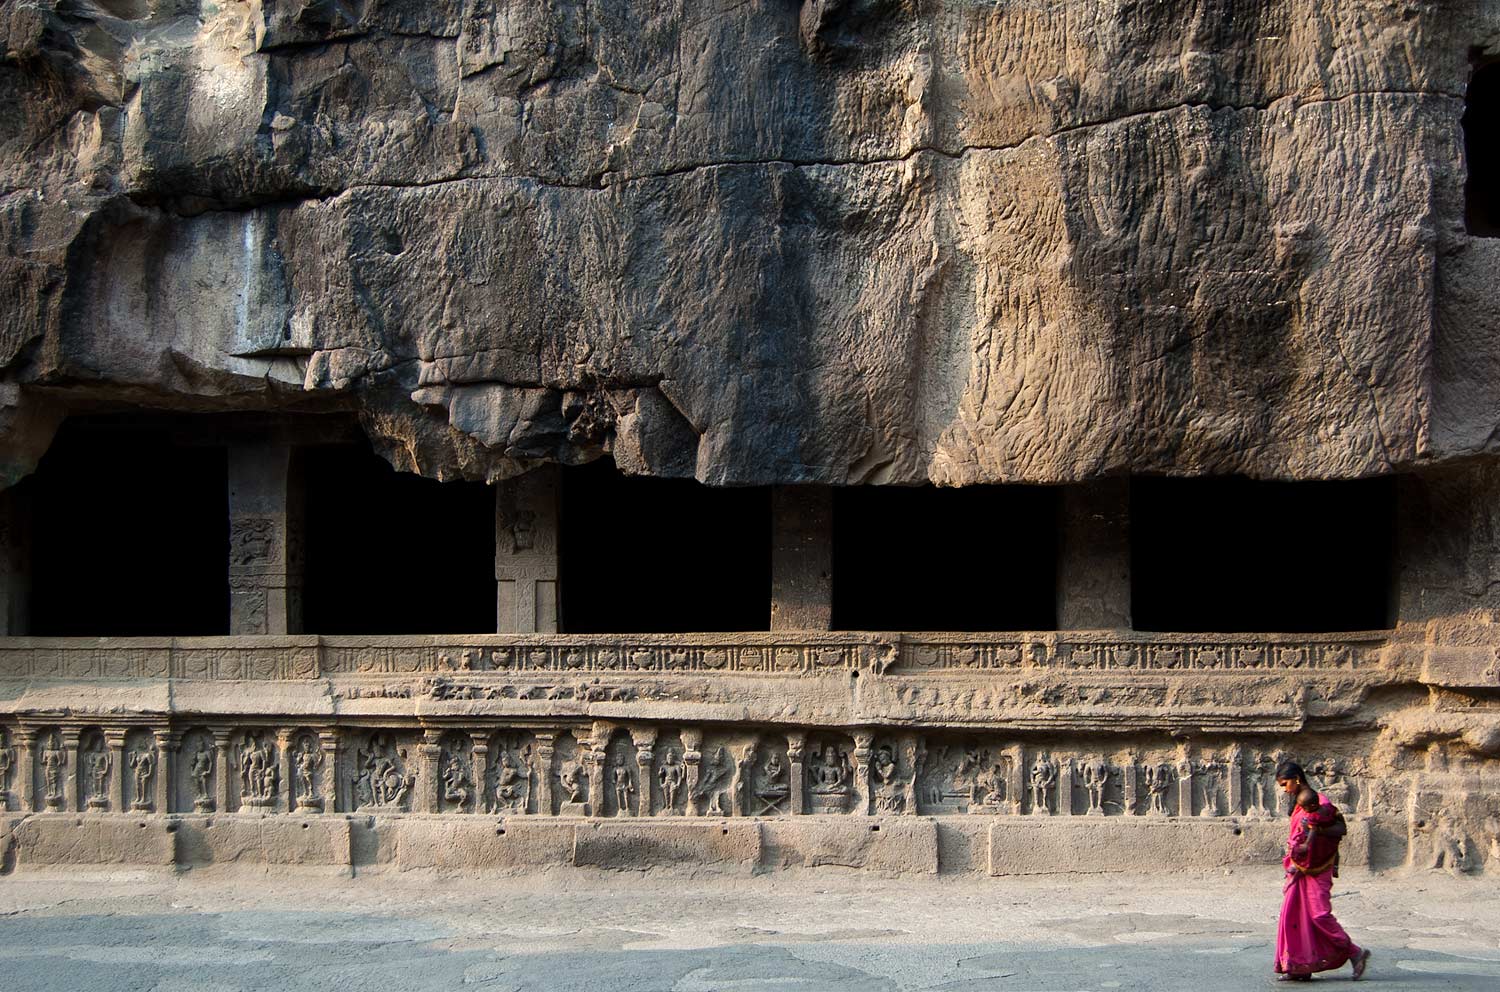 Largest rock carving at Ellora, with a Dravidyan temple at its center and halls carved out of the surrounding cliff face, shown here